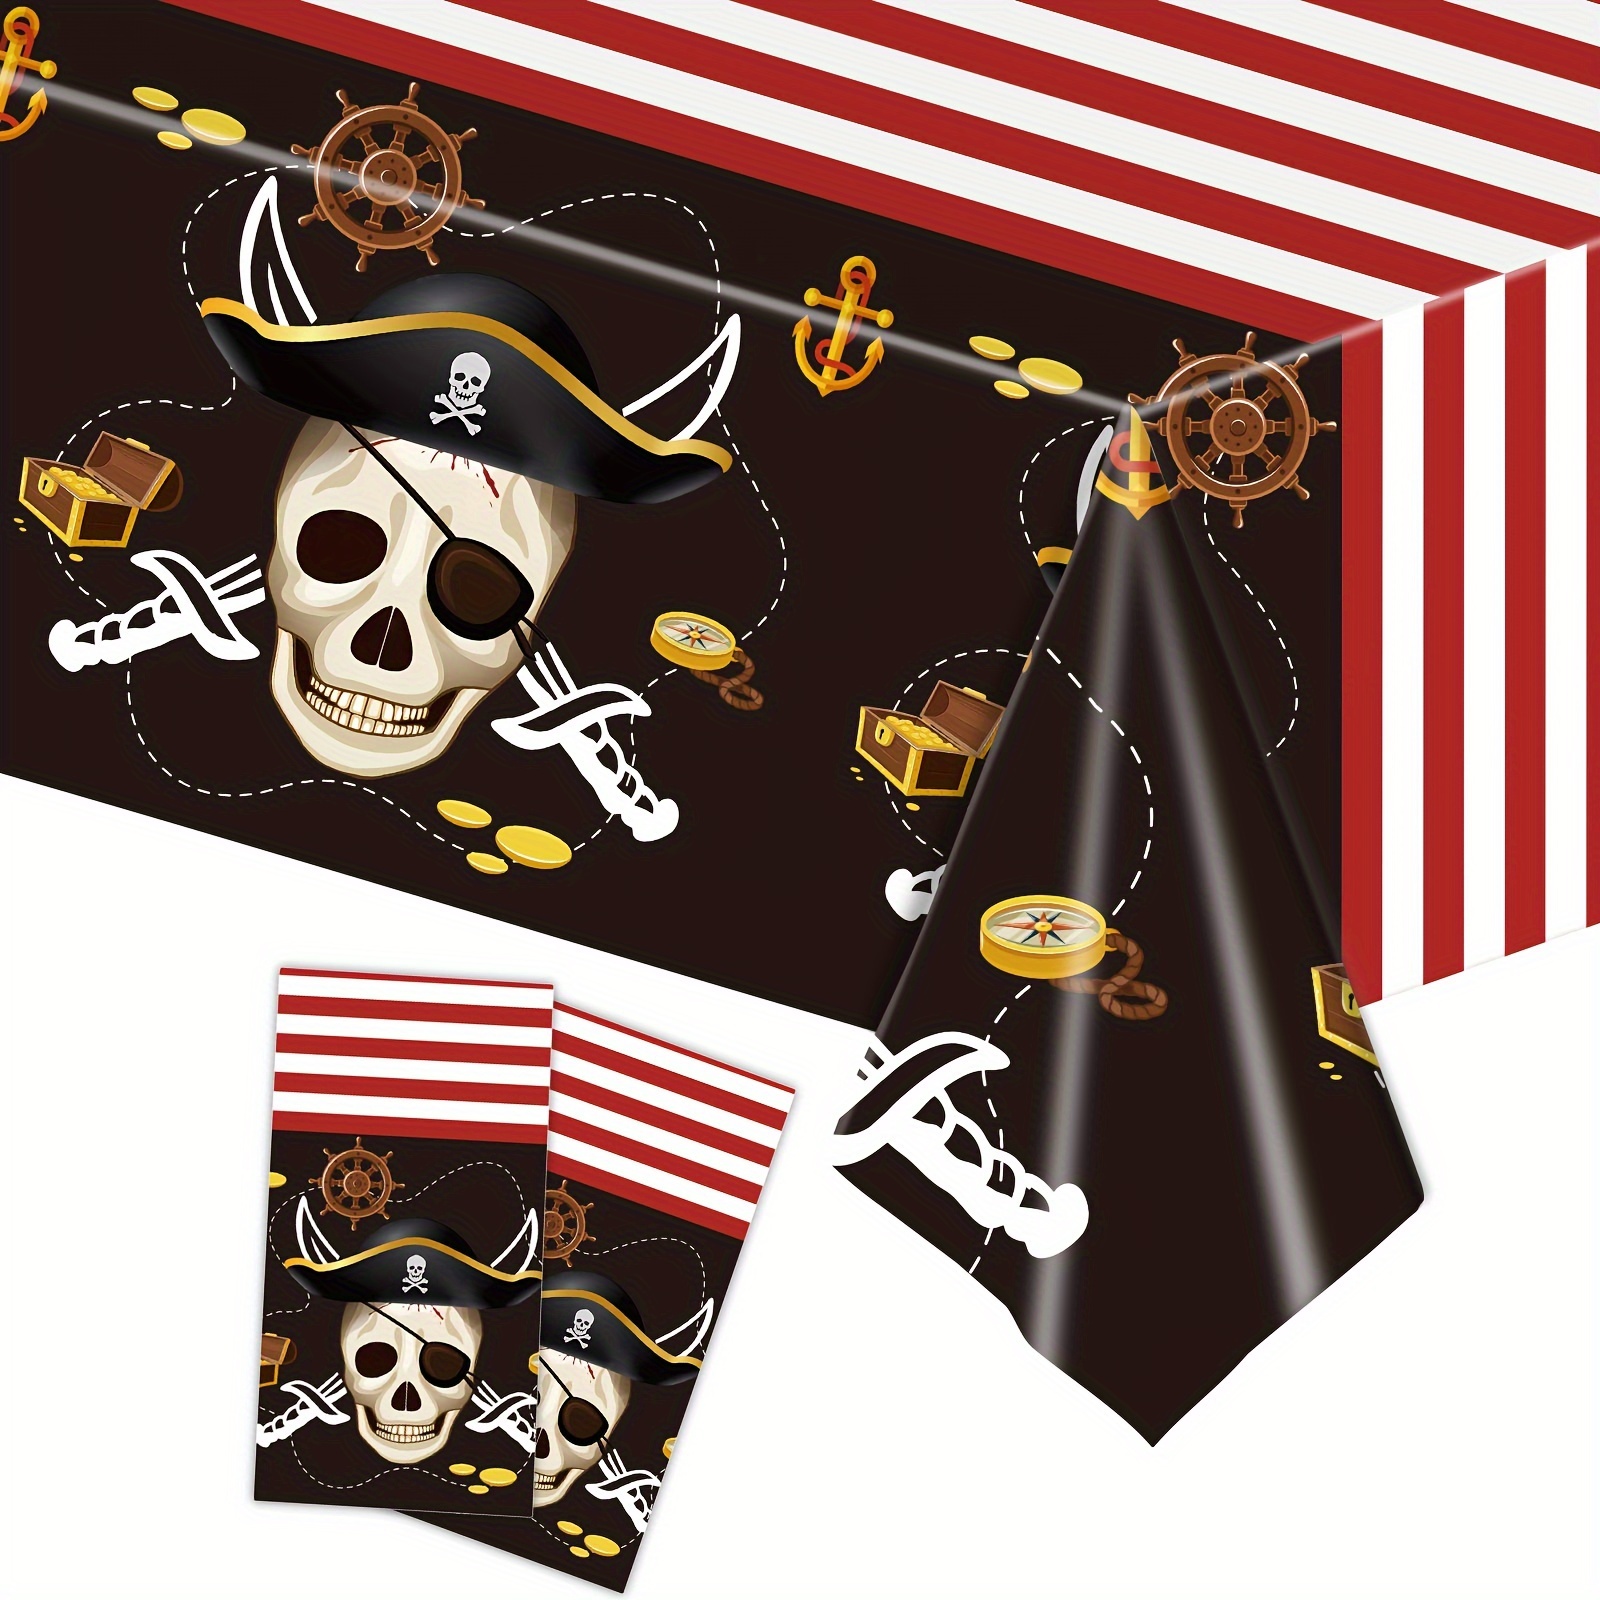 

Pirate Theme Party Tablecloth - Rectangular, Plastic, Machine-woven For Kitchen & Dining Decor